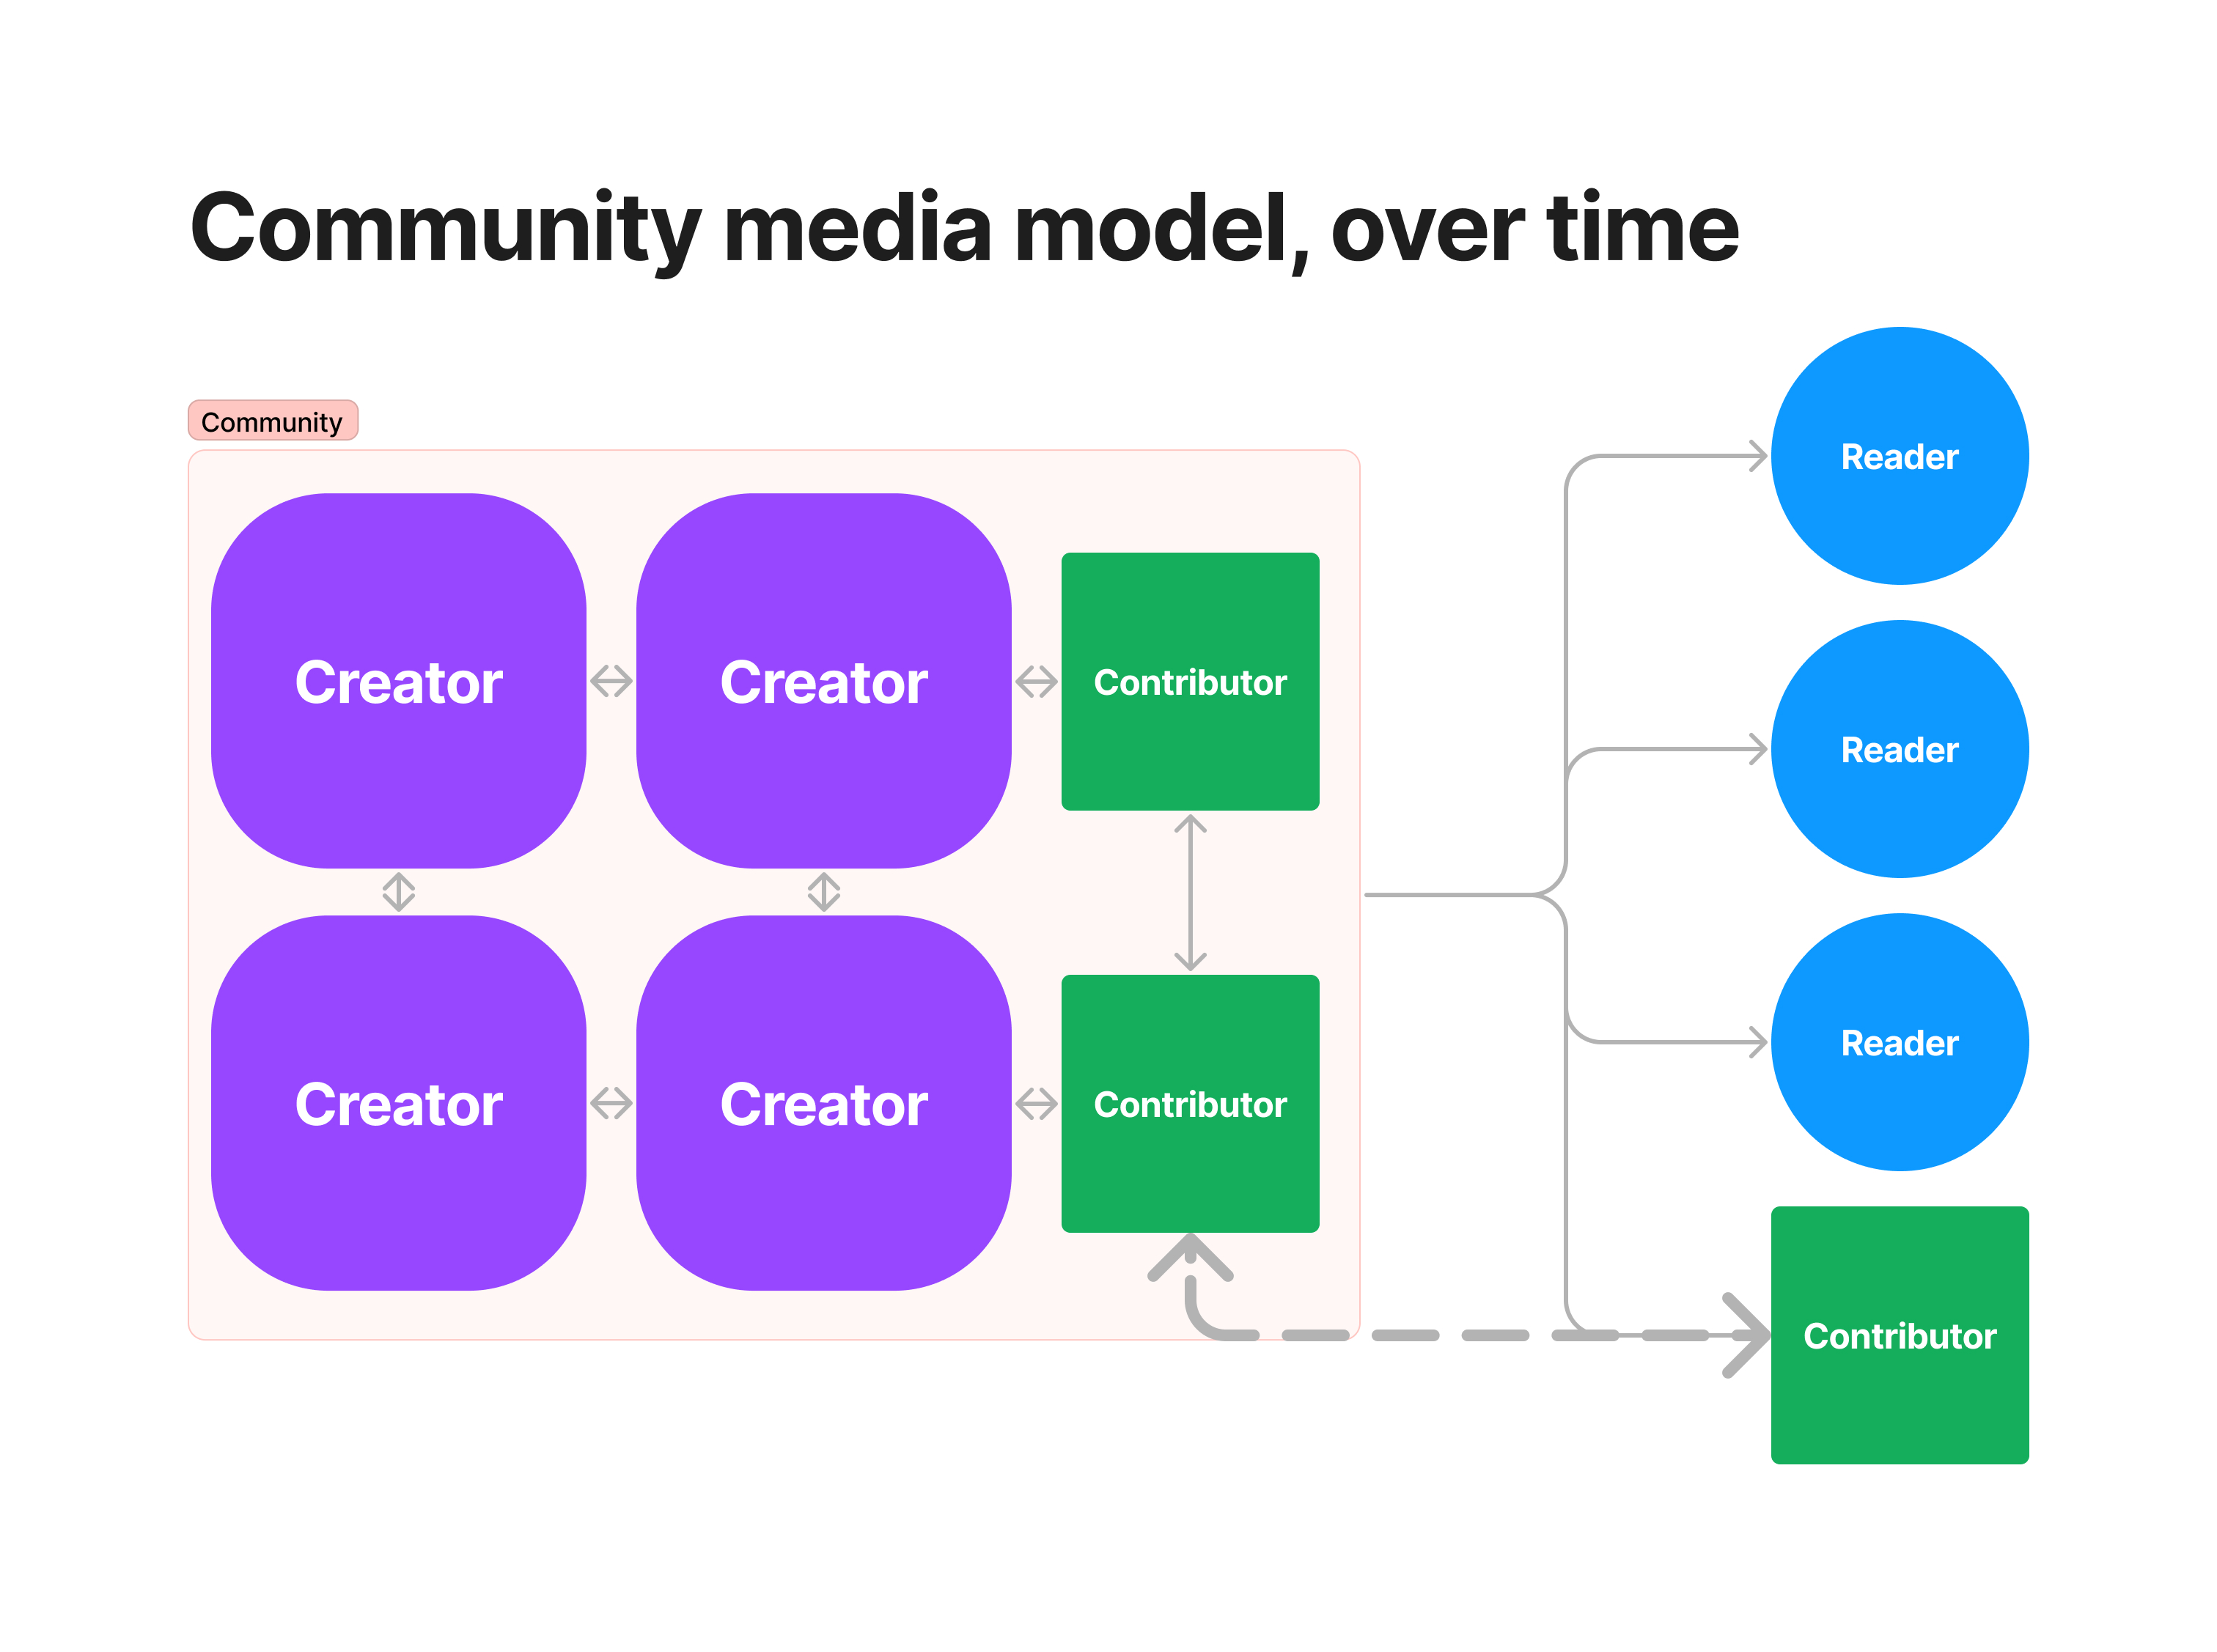 Community media model over time: Contributors move between being a reader and a contributor